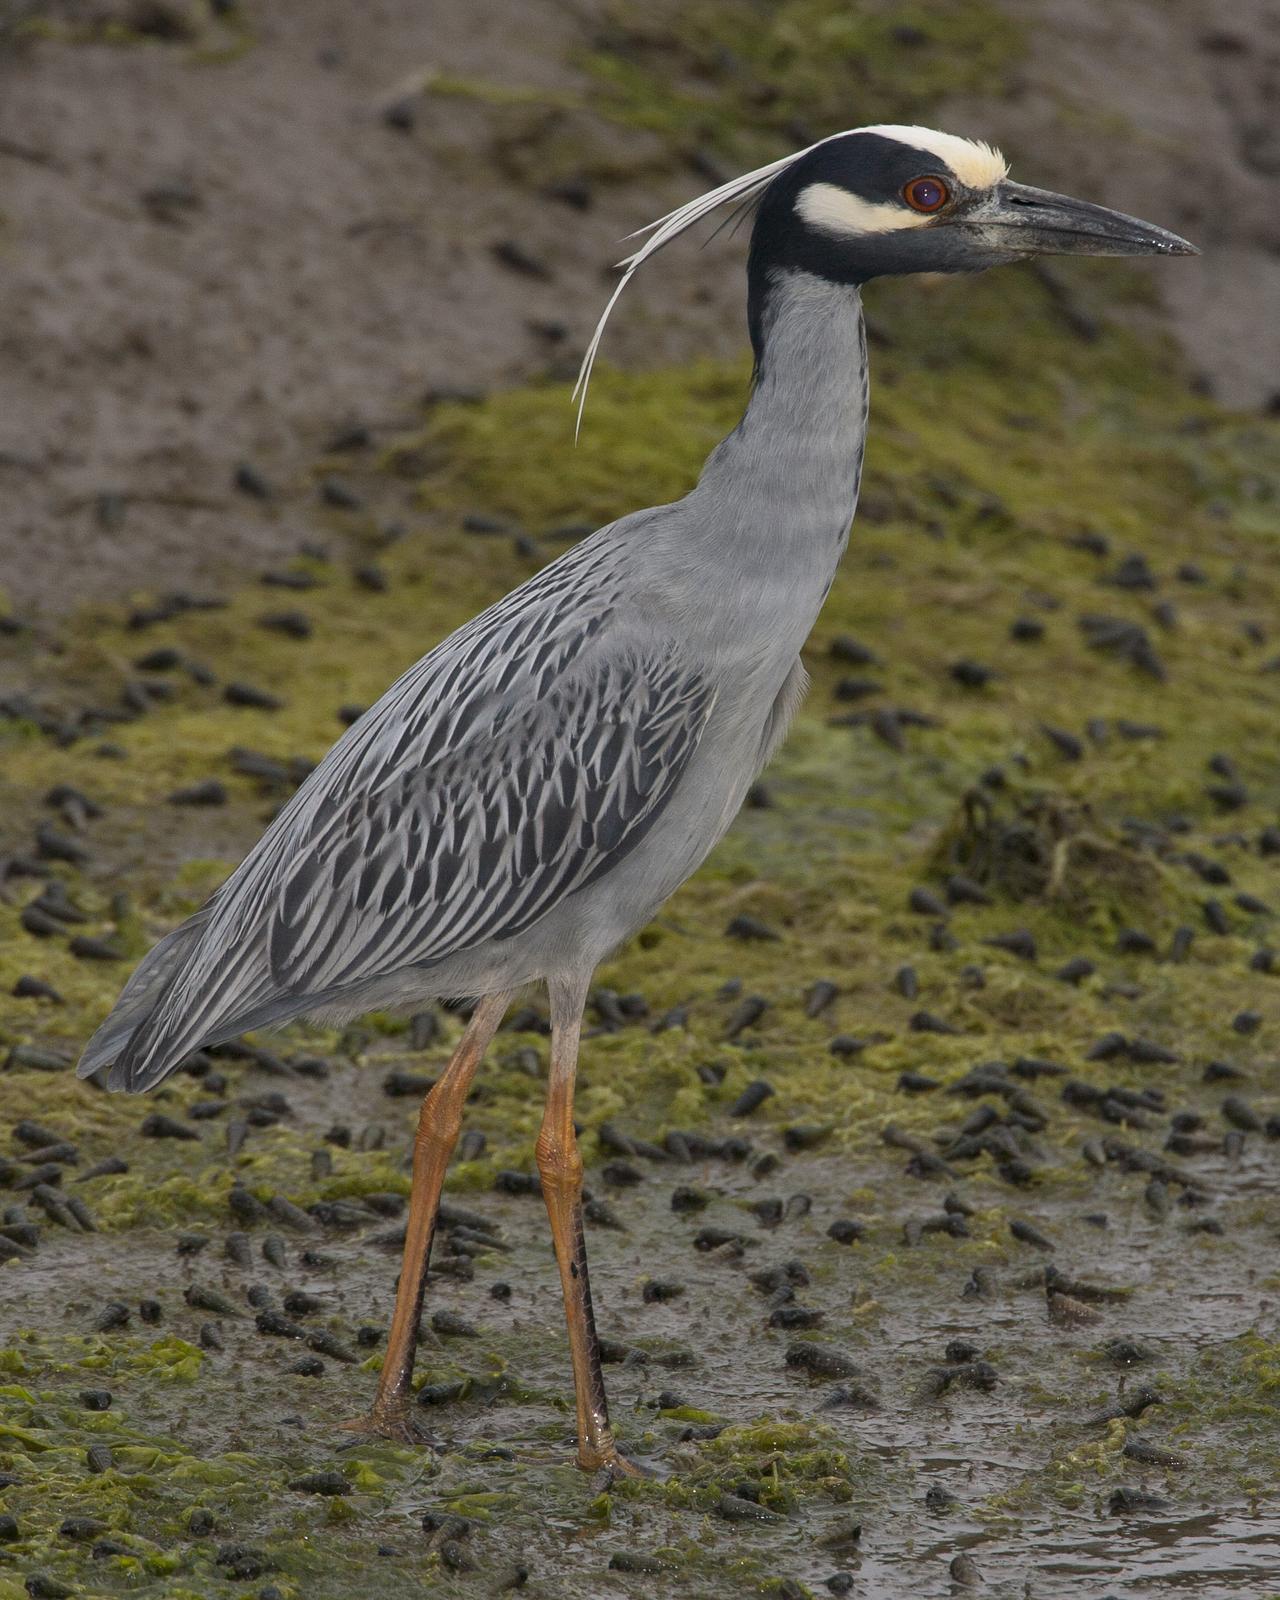 Yellow-crowned Night-Heron Photo by Jeff Moore